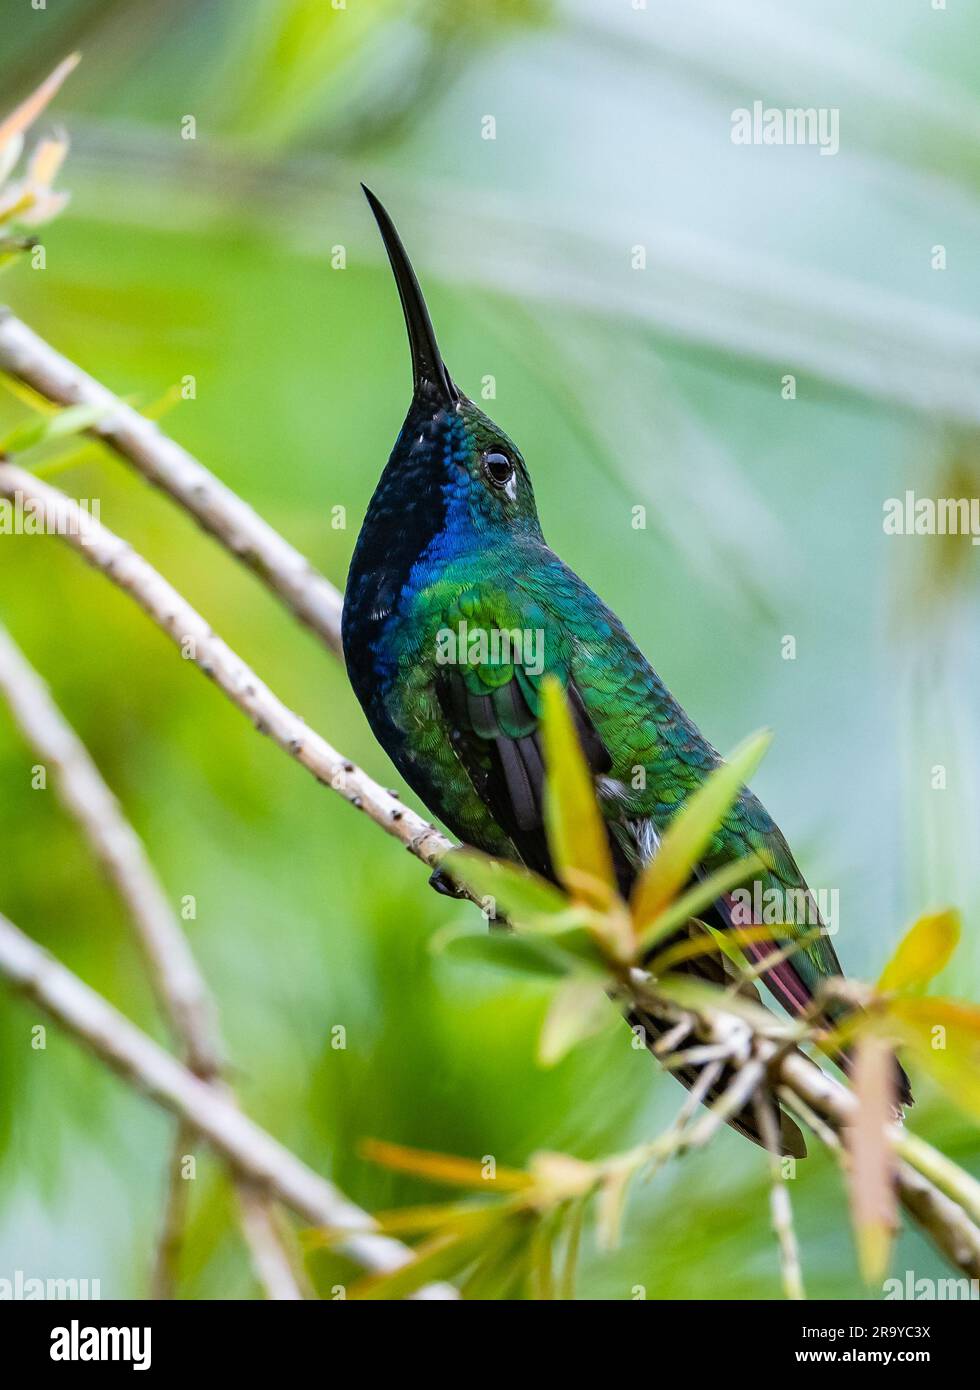 A male Black-throated Mango hummingbird (Anthracothorax nigricollis) perched on a branch. Colombia, South America. Stock Photo